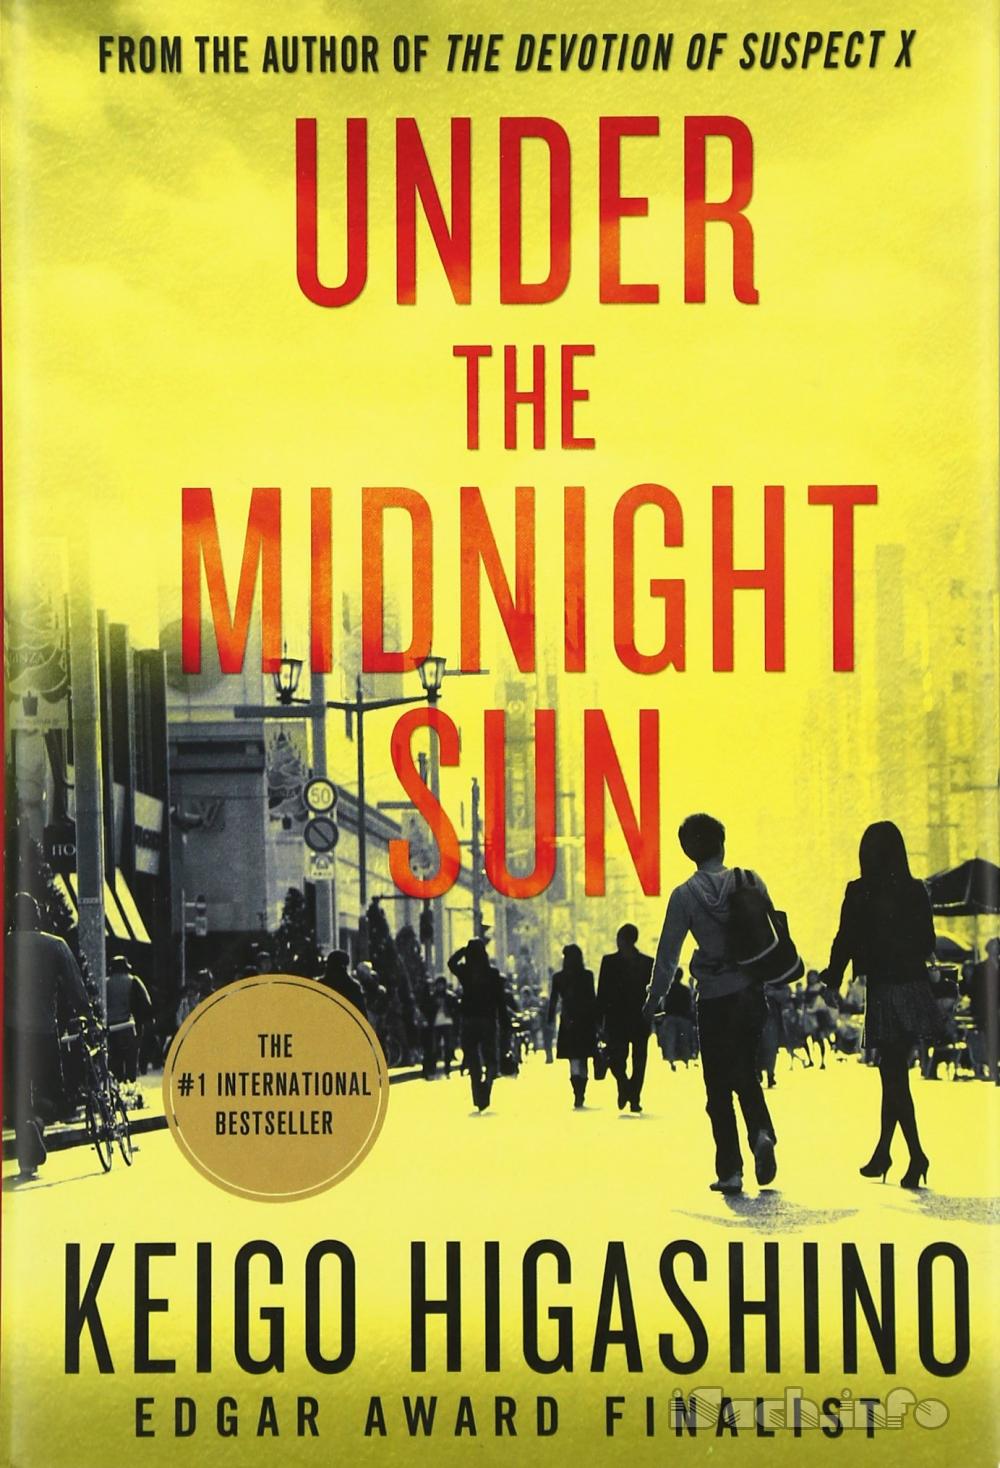 journey under the midnight sun review